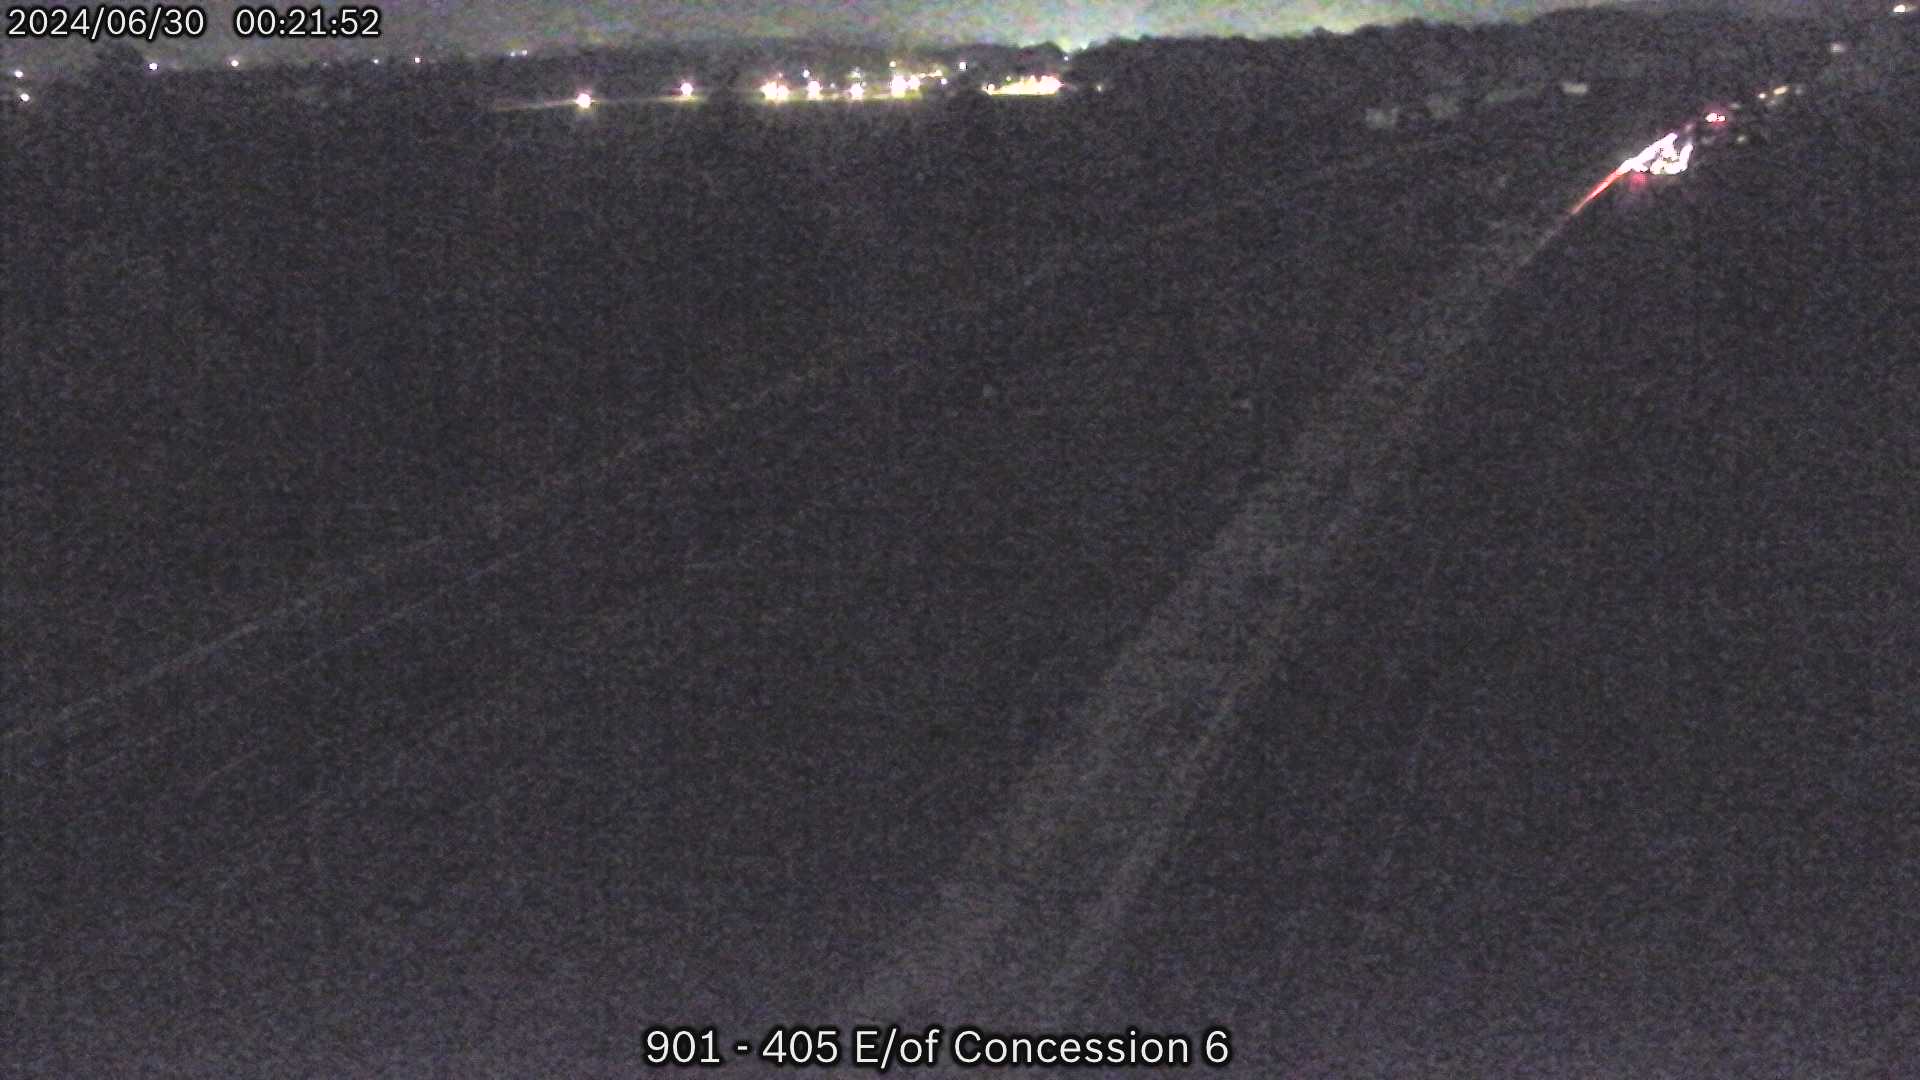 Traffic Cam 405 Concession 6 Rd. Player